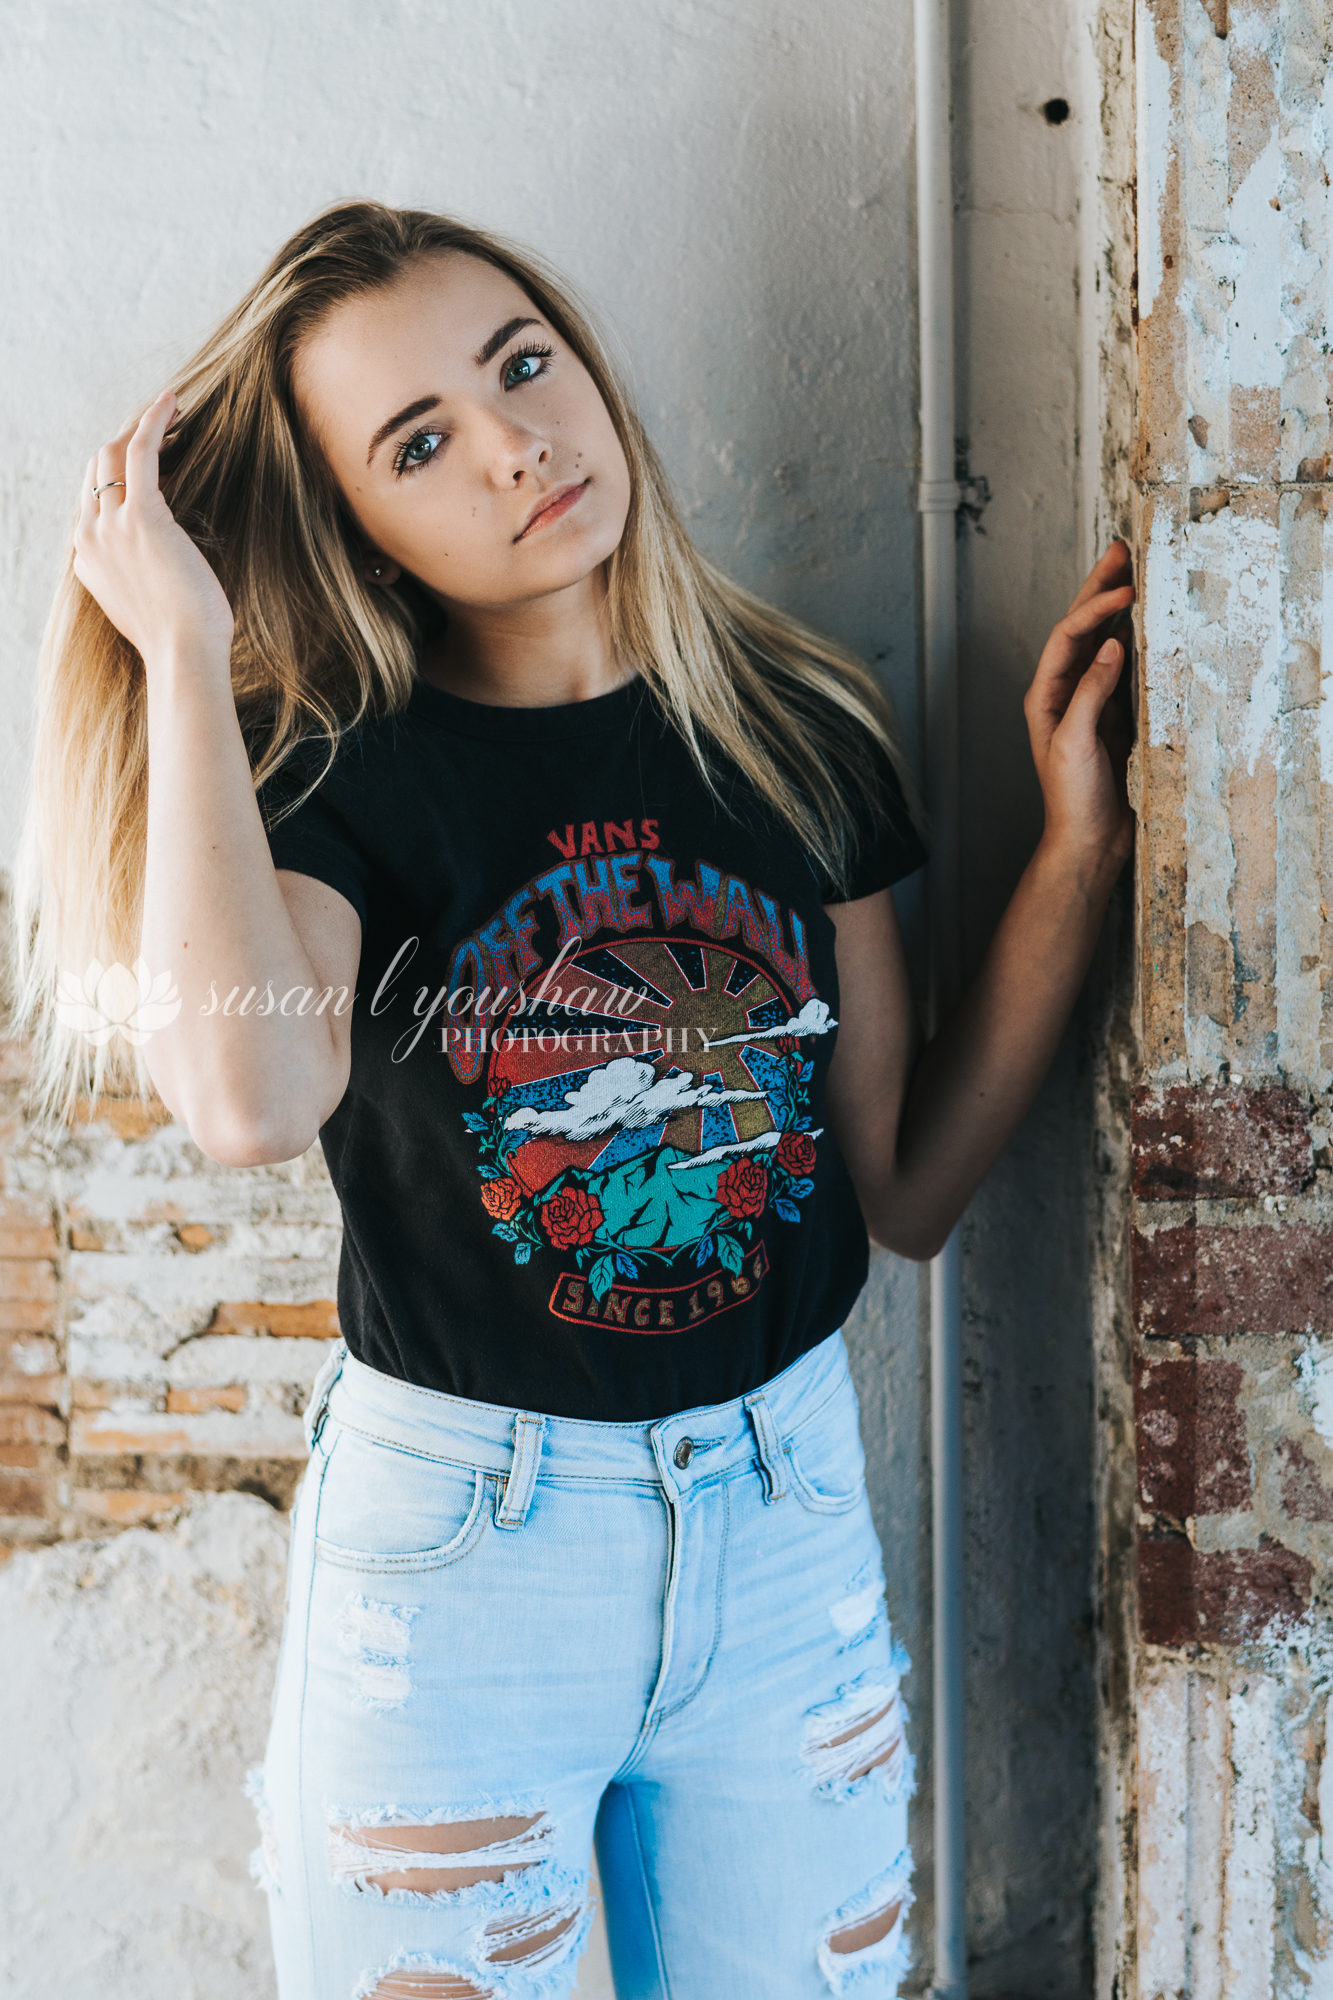 Class of 2020: Christina — SLY Photography